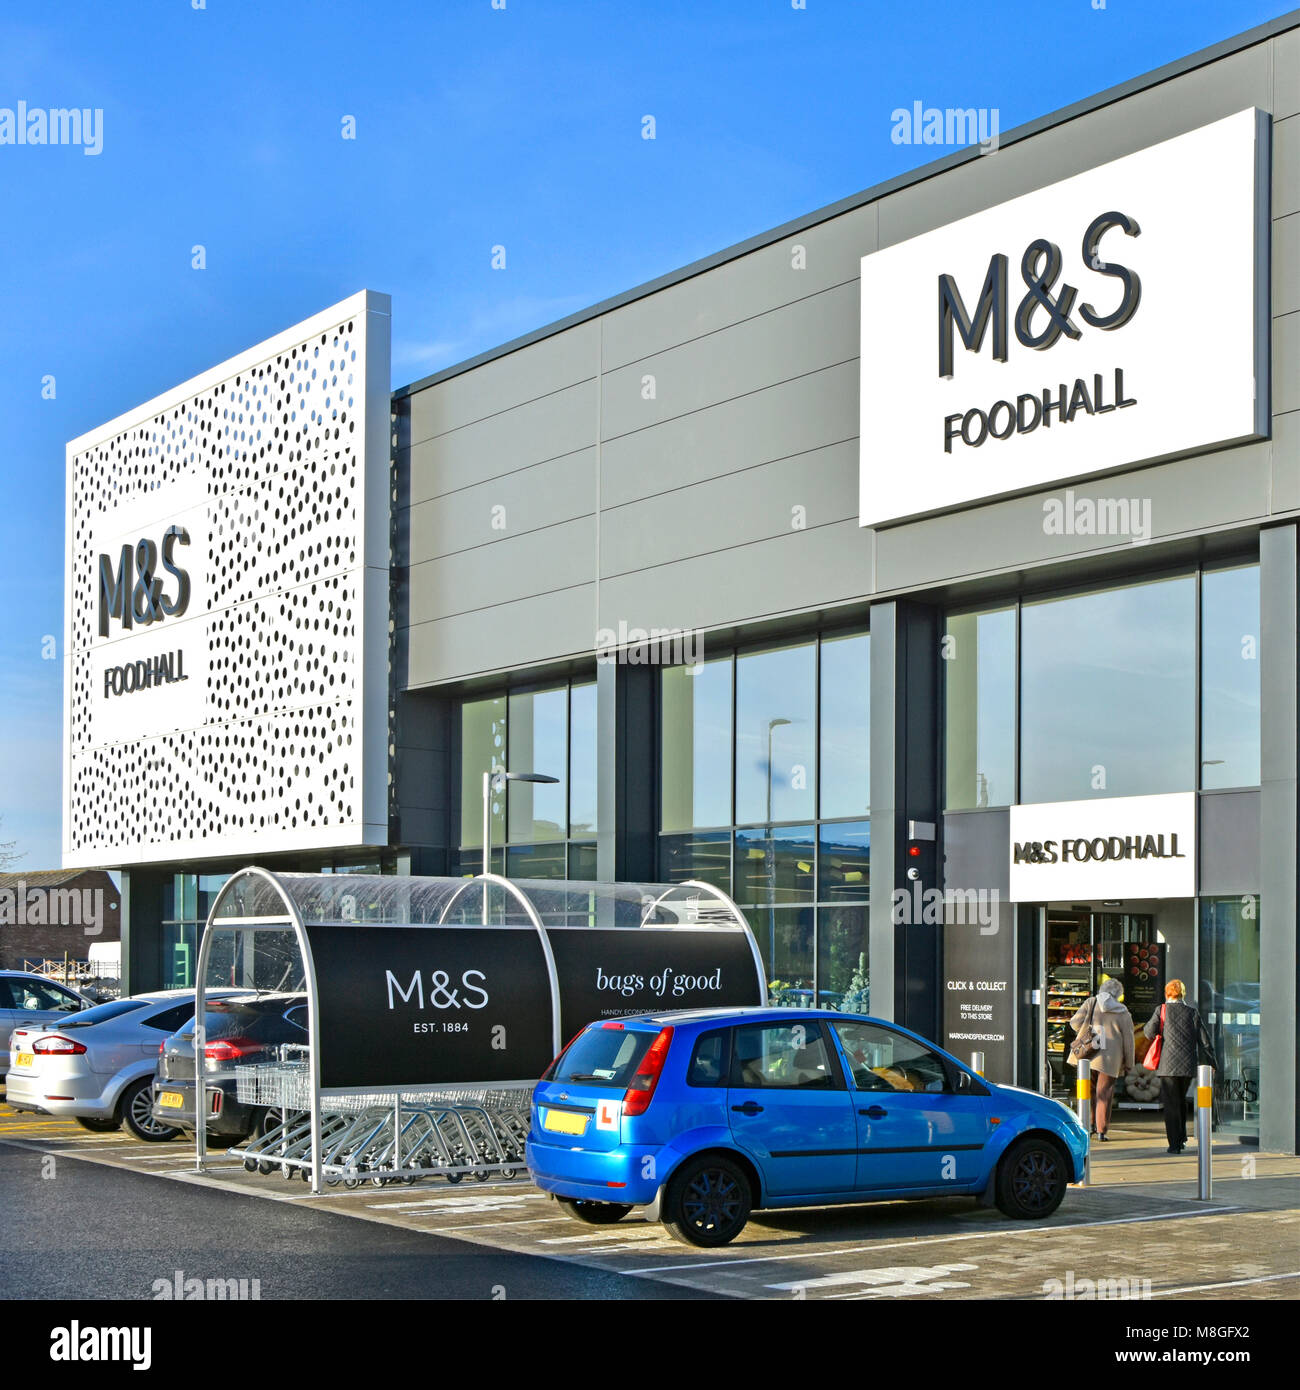 M&S modern architecture of shop front building at Marks and Spencer foodhall in retail park food hall shopping & customer Chelmsford Essex England UK Stock Photo